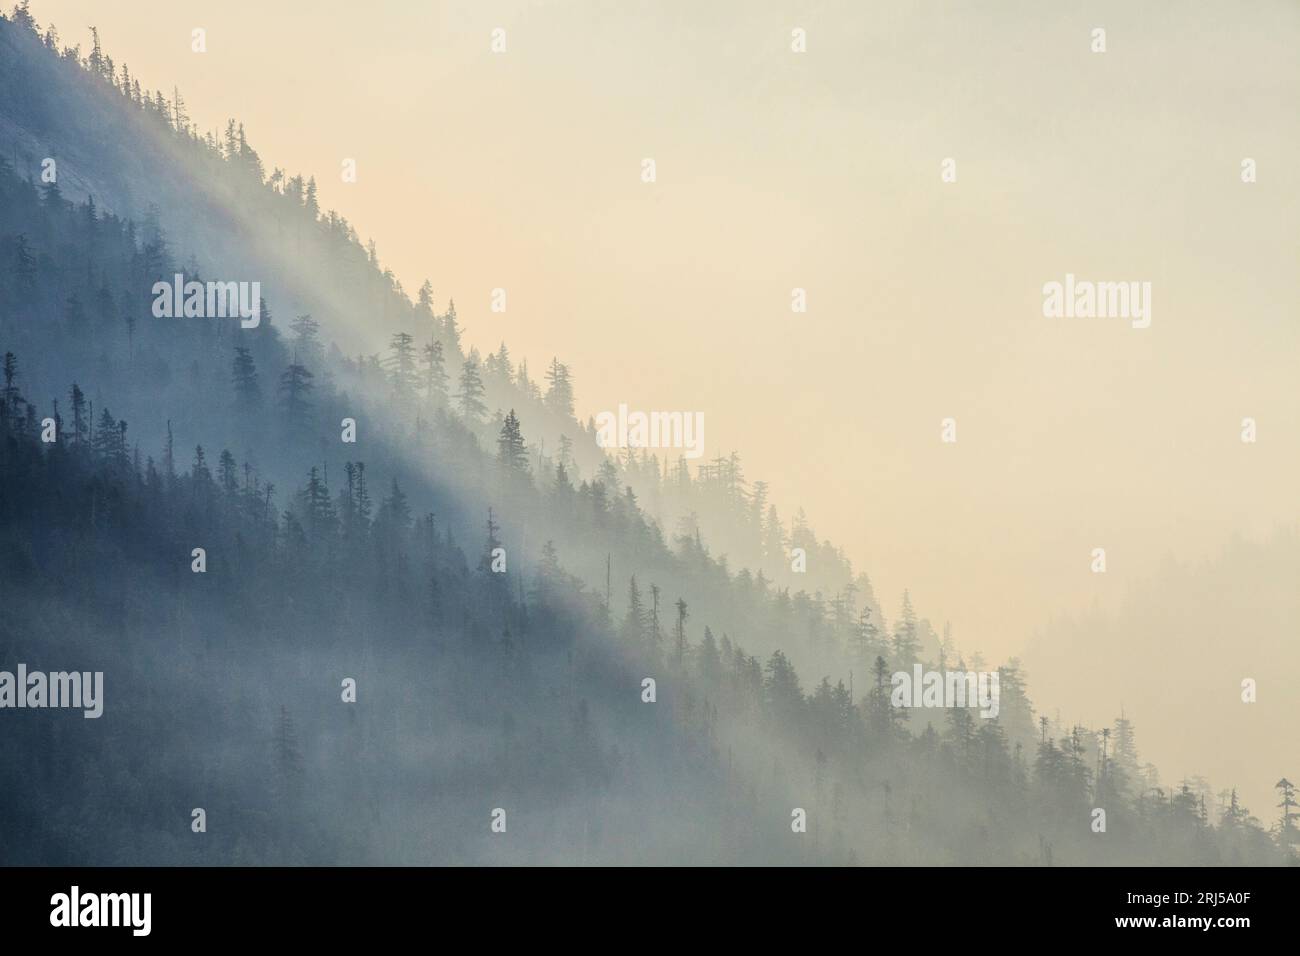 Smoke rises from a forest fire in British Columbia, Canada Stock Photo